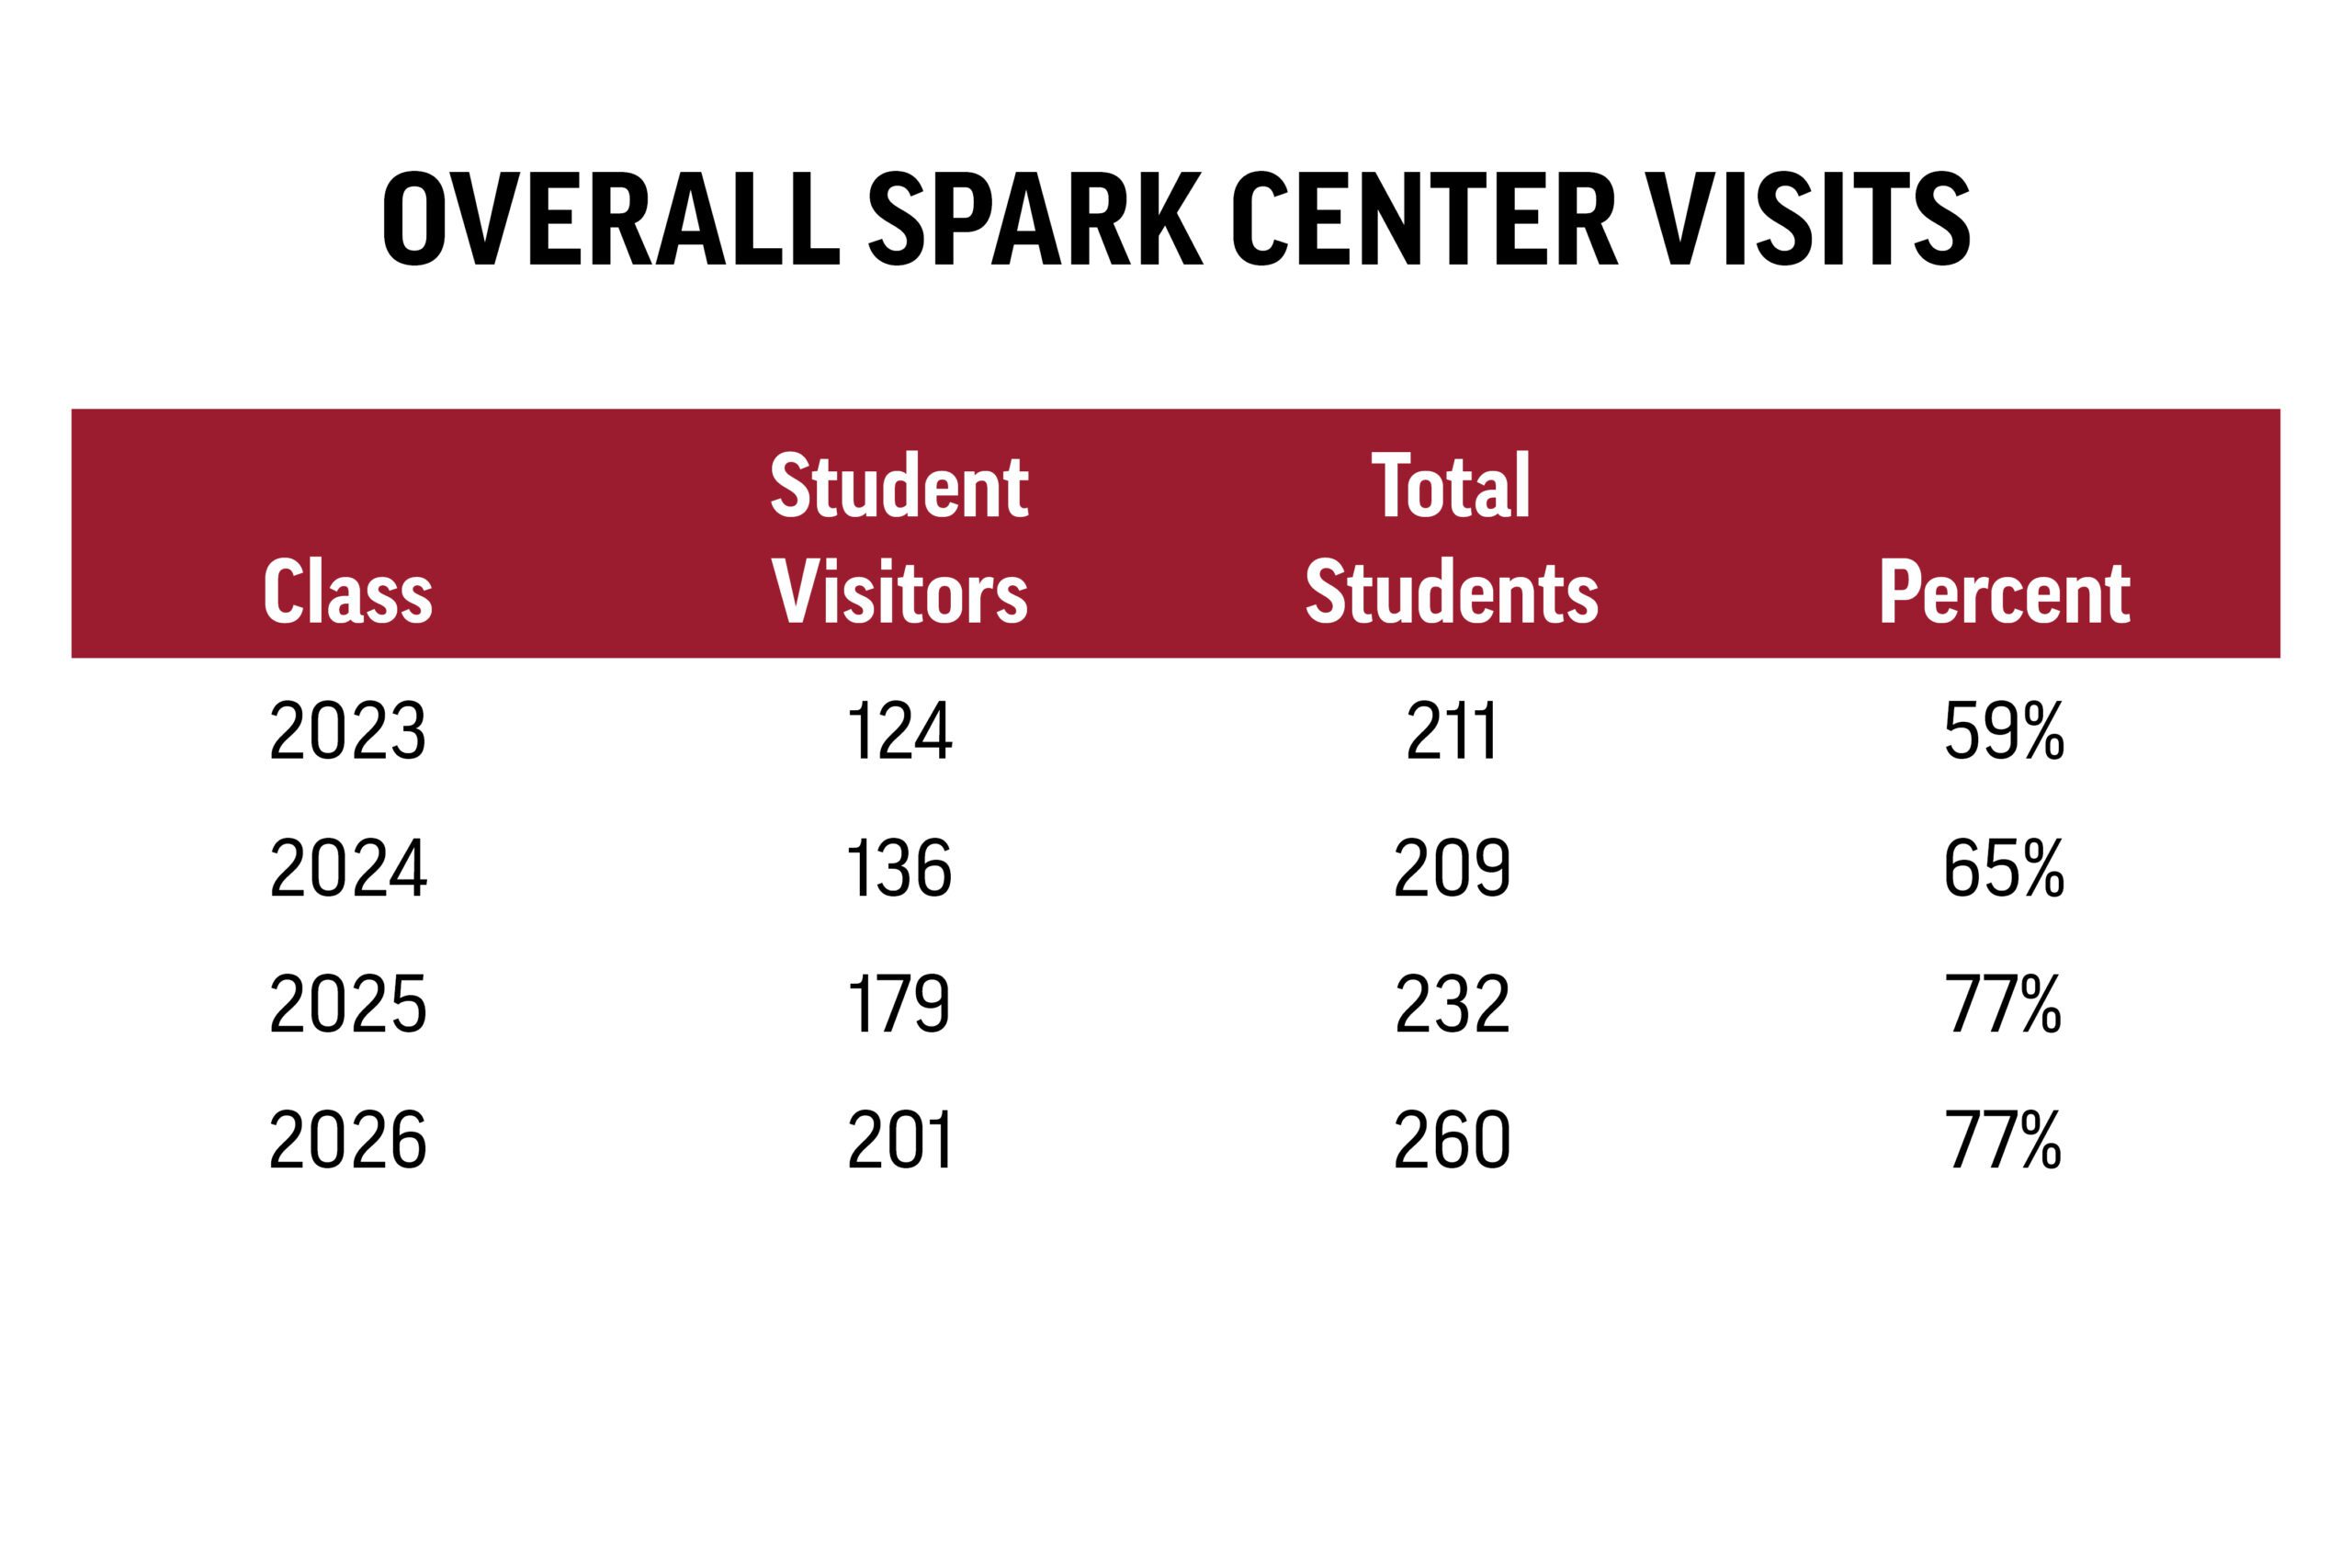 Table 1 title reads: Overall Spark Center Visits Header Row reads: Class, Student Visitors, Total Students, Percent Row 1 values, "Class: 2023, Student Visitors: 124, Total Students: 211, Percent: 59% Row 1 values, "Class: 2024, Student Visitors: 136, Total Students: 209, Percent: 65% Row 1 values, "Class: 2025, Student Visitors: 179, Total Students: 232, Percent: 77% Row 1 values, "Class: 2026, Student Visitors: 201, Total Students: 260, Percent: 77%